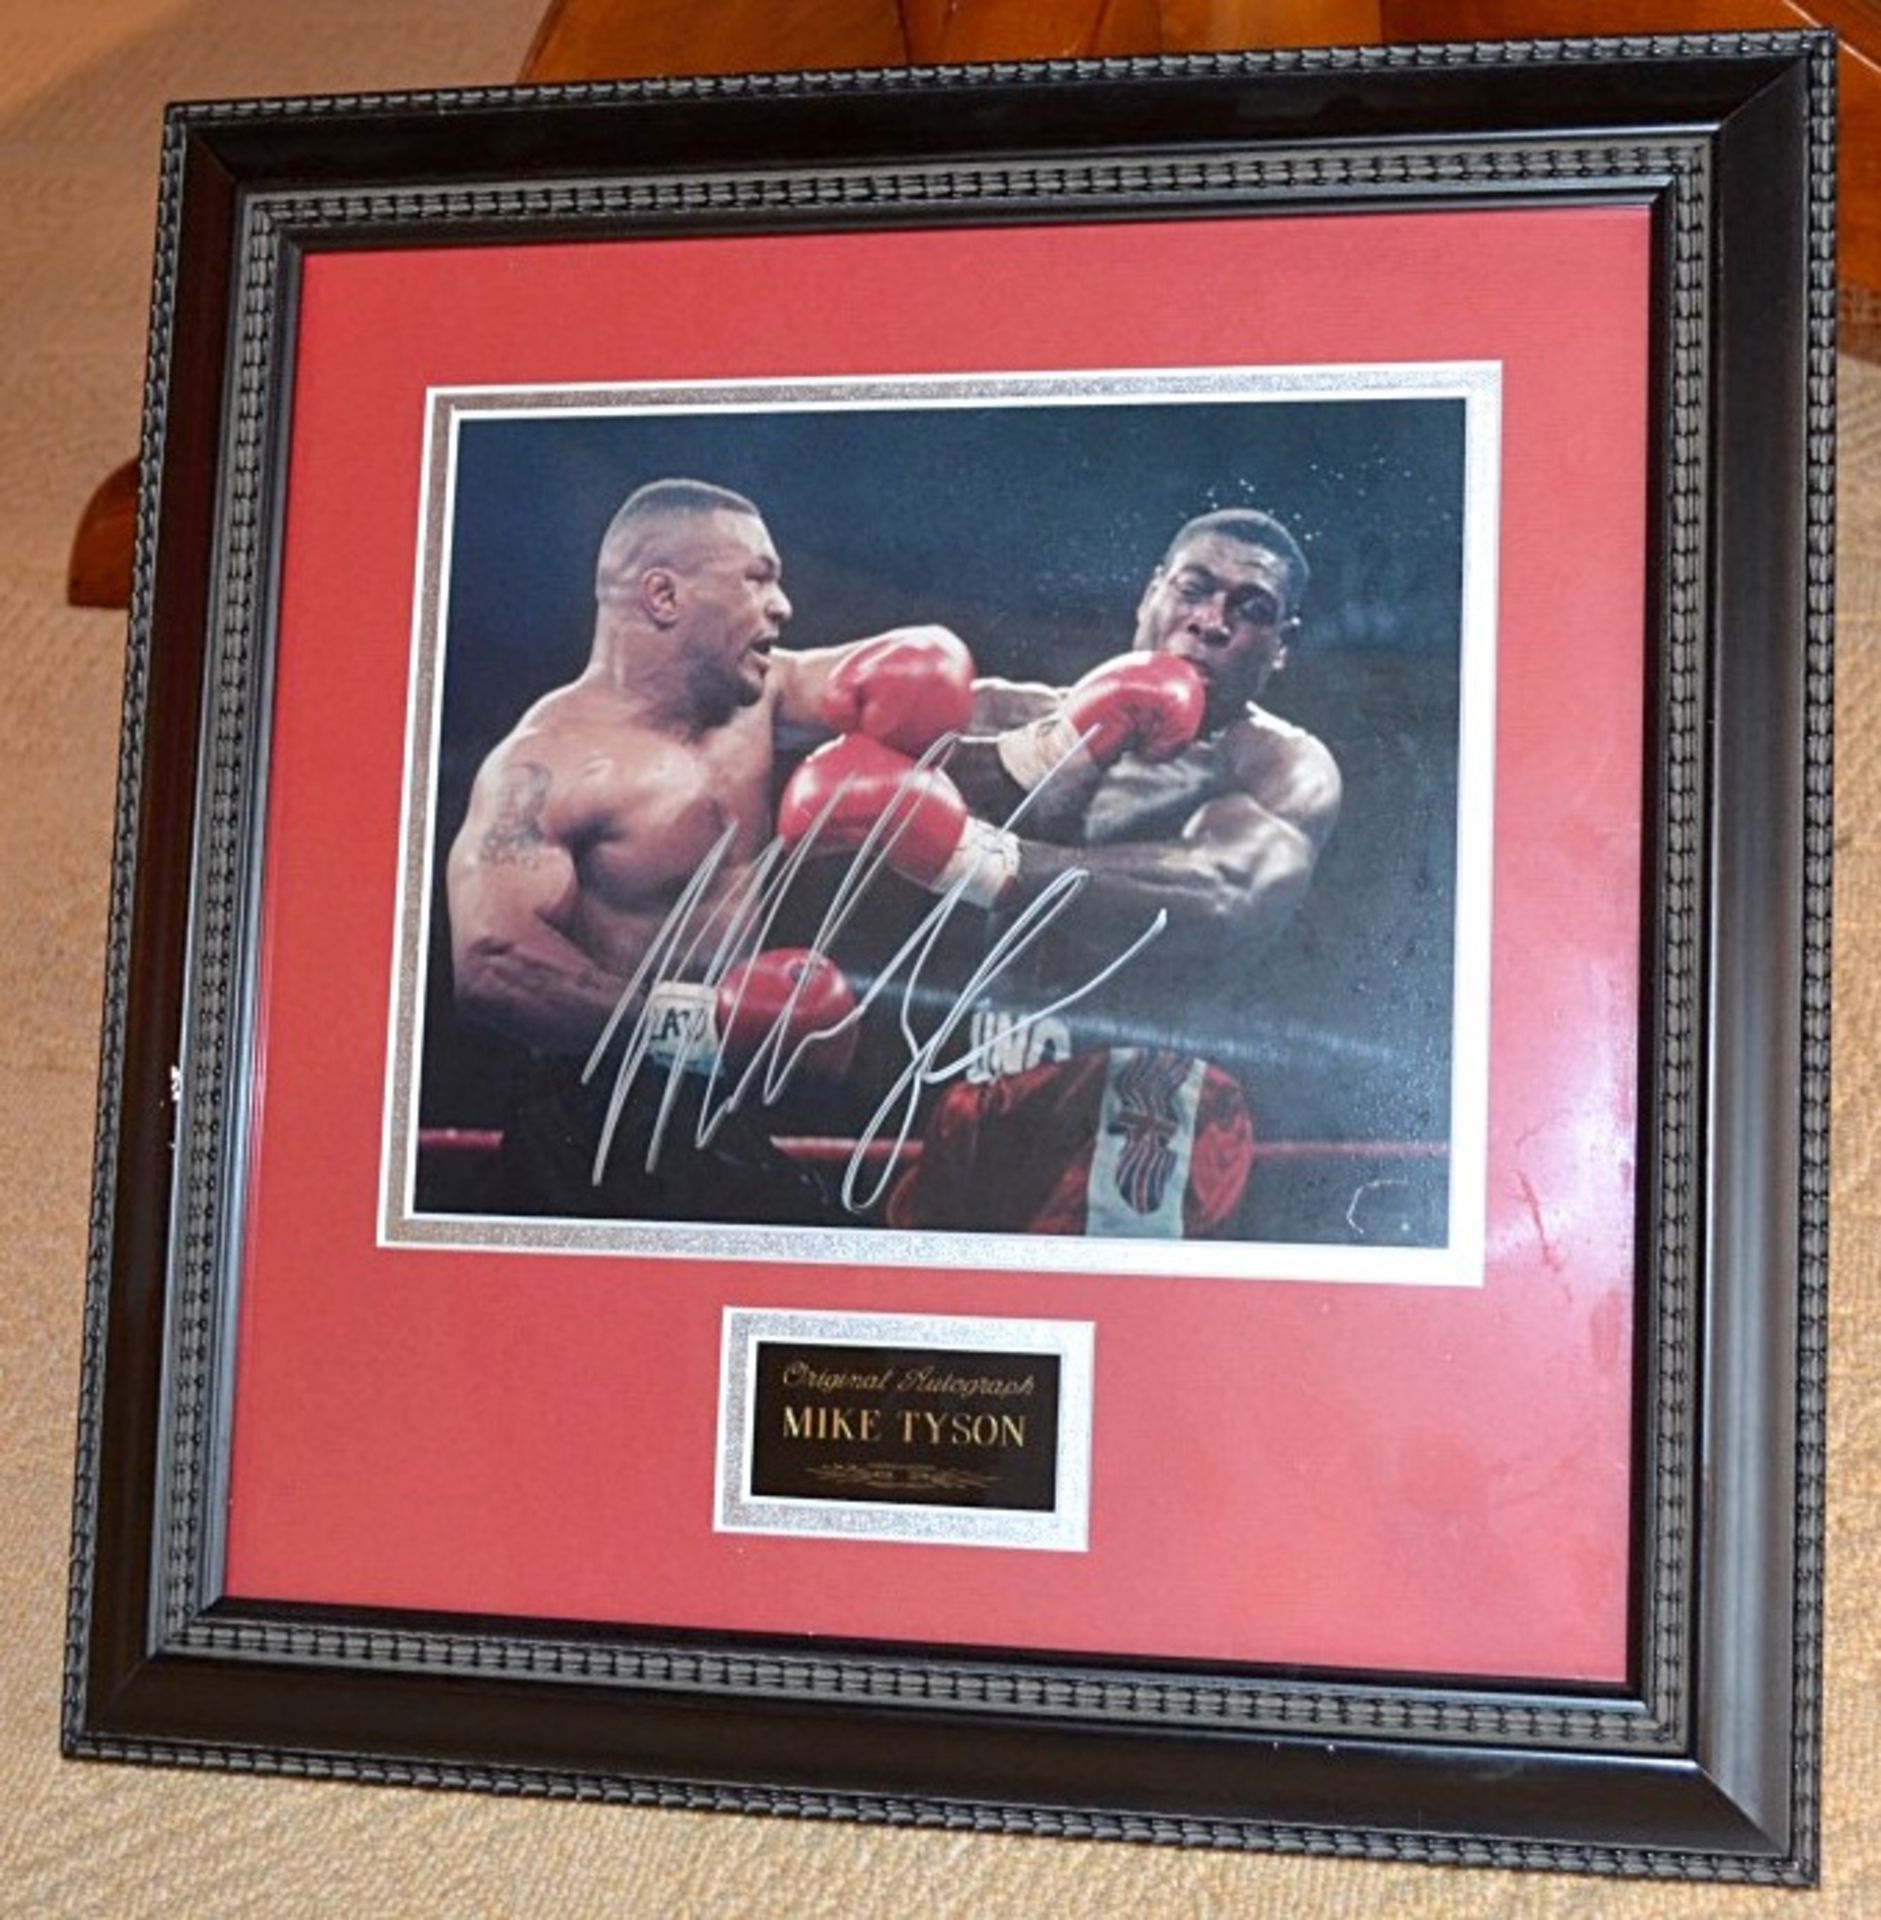 1 x Genuine Framed MIKE TYSON Hand Signed Photo - Guarantee Of Authenticity On Back - Autographed